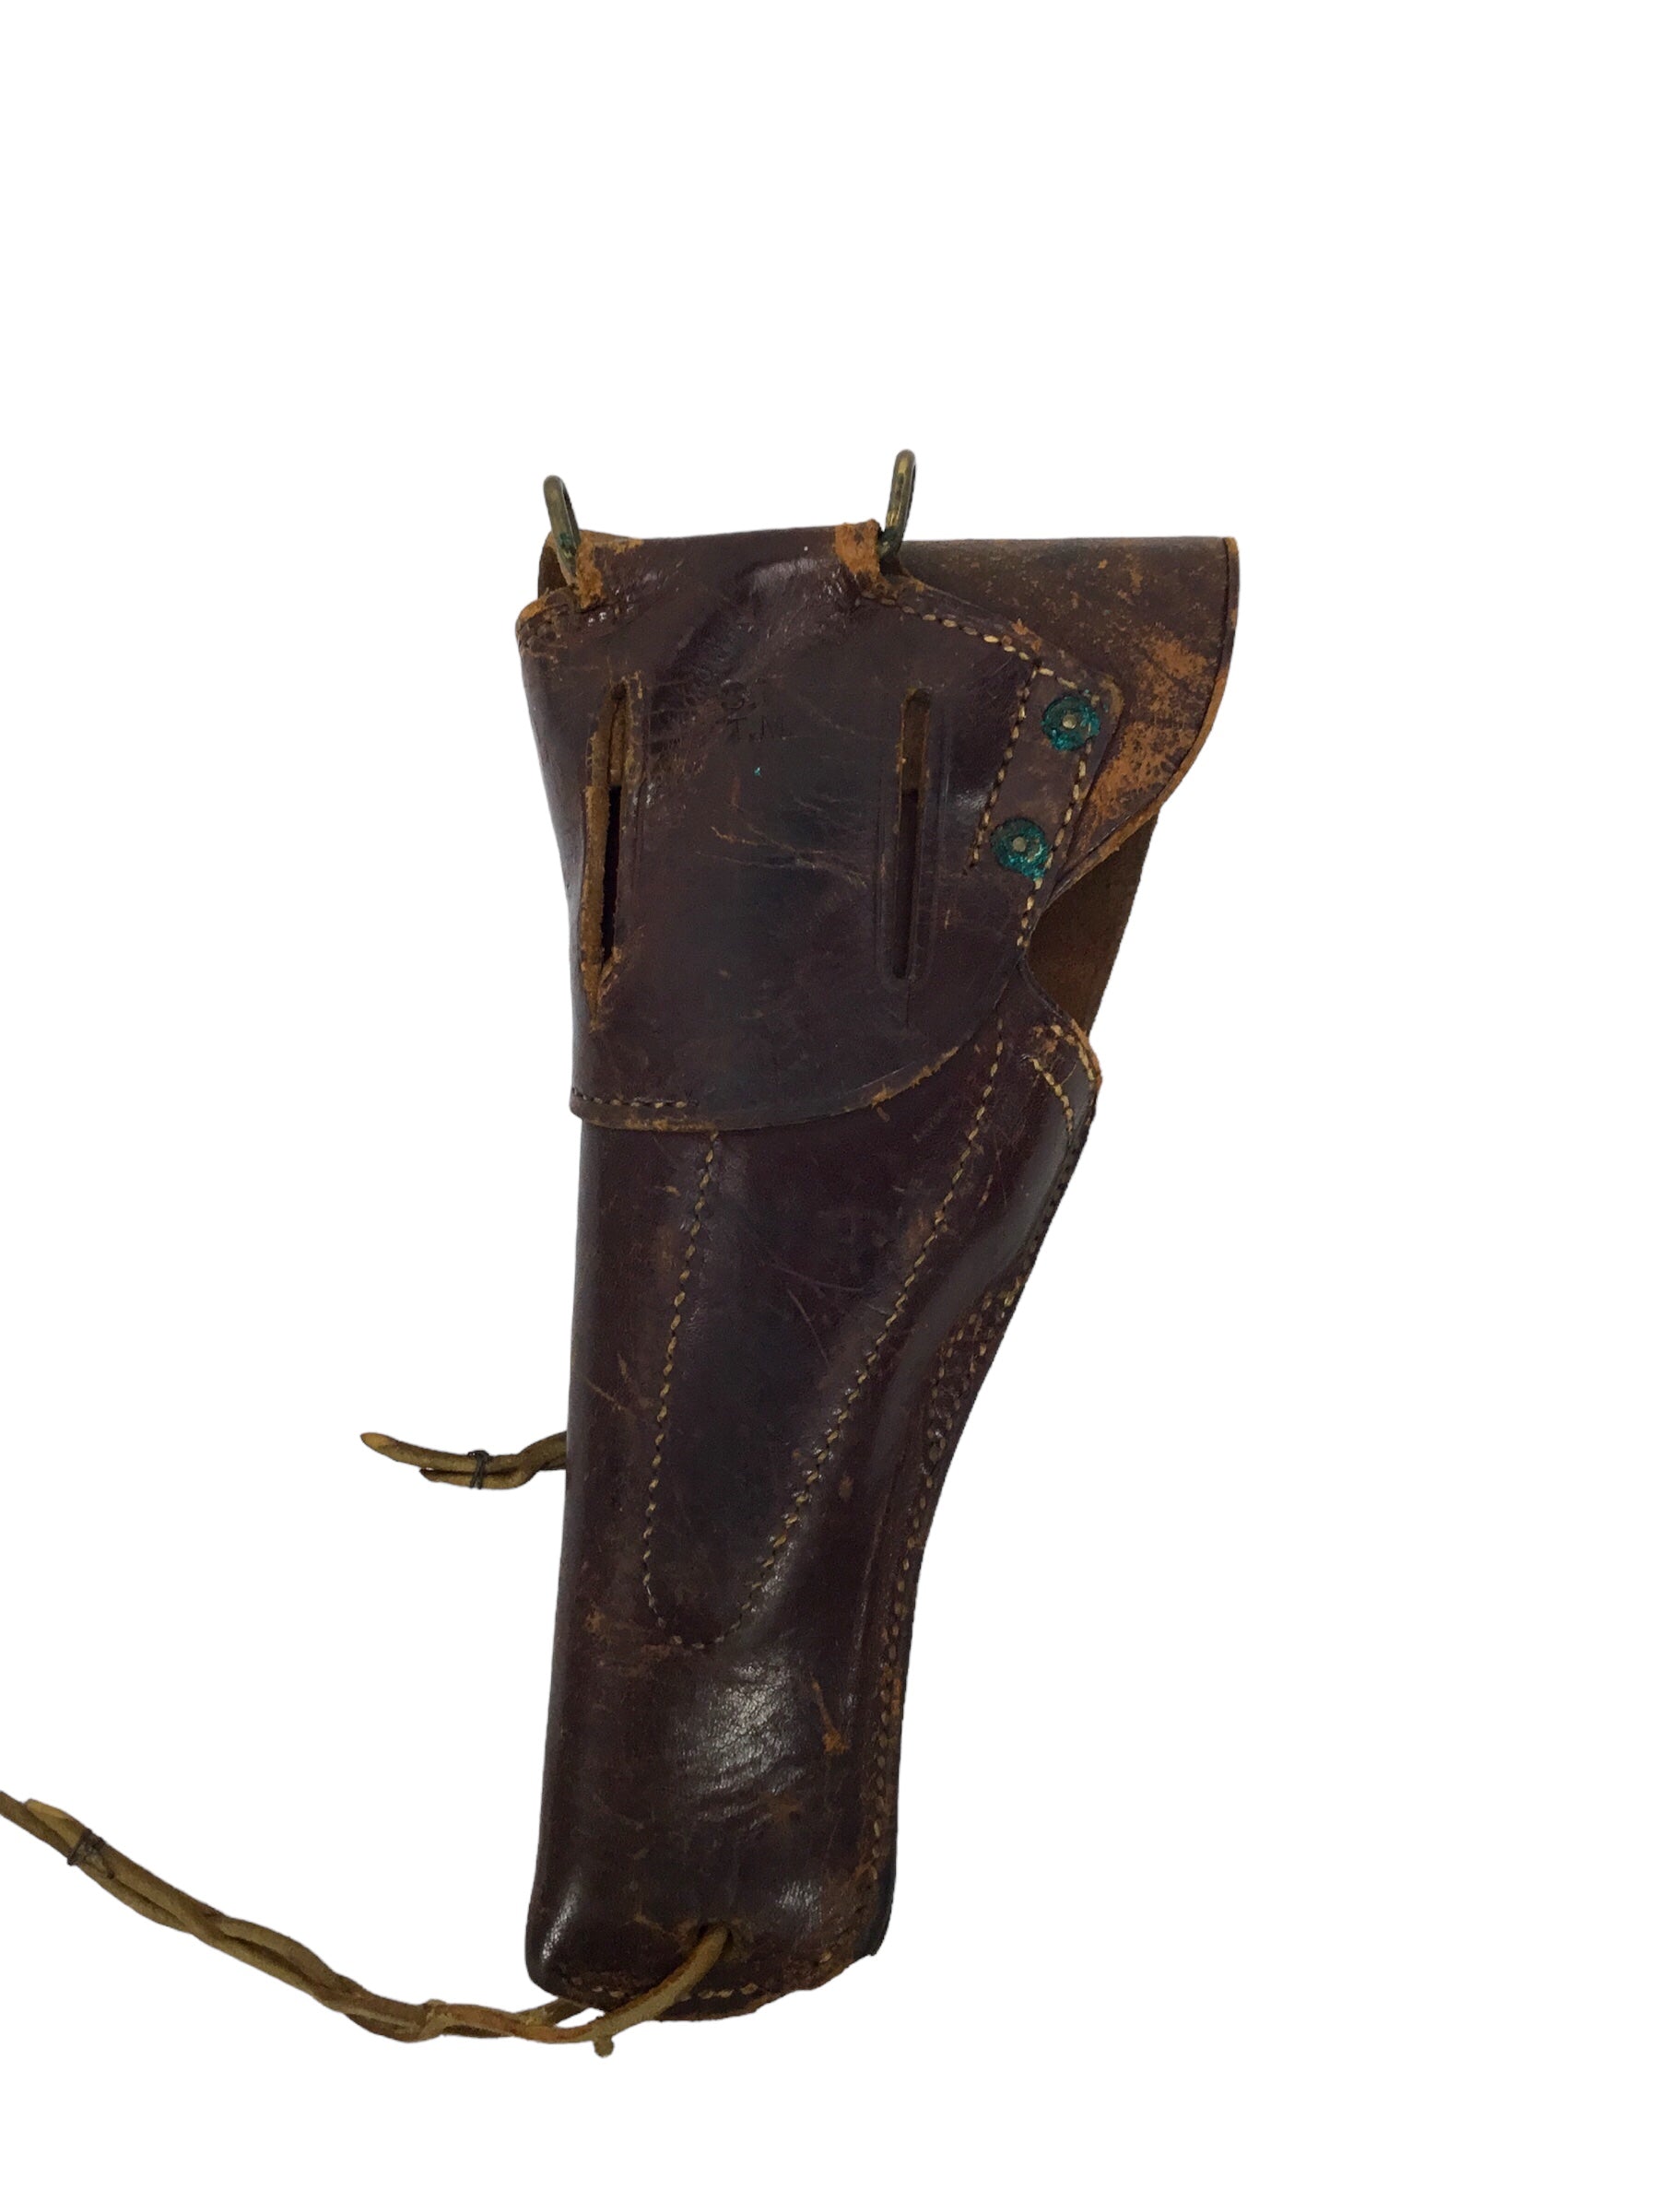 U.S. 1911 Leather Pistol Holster marked "S.&R., T.M.U."